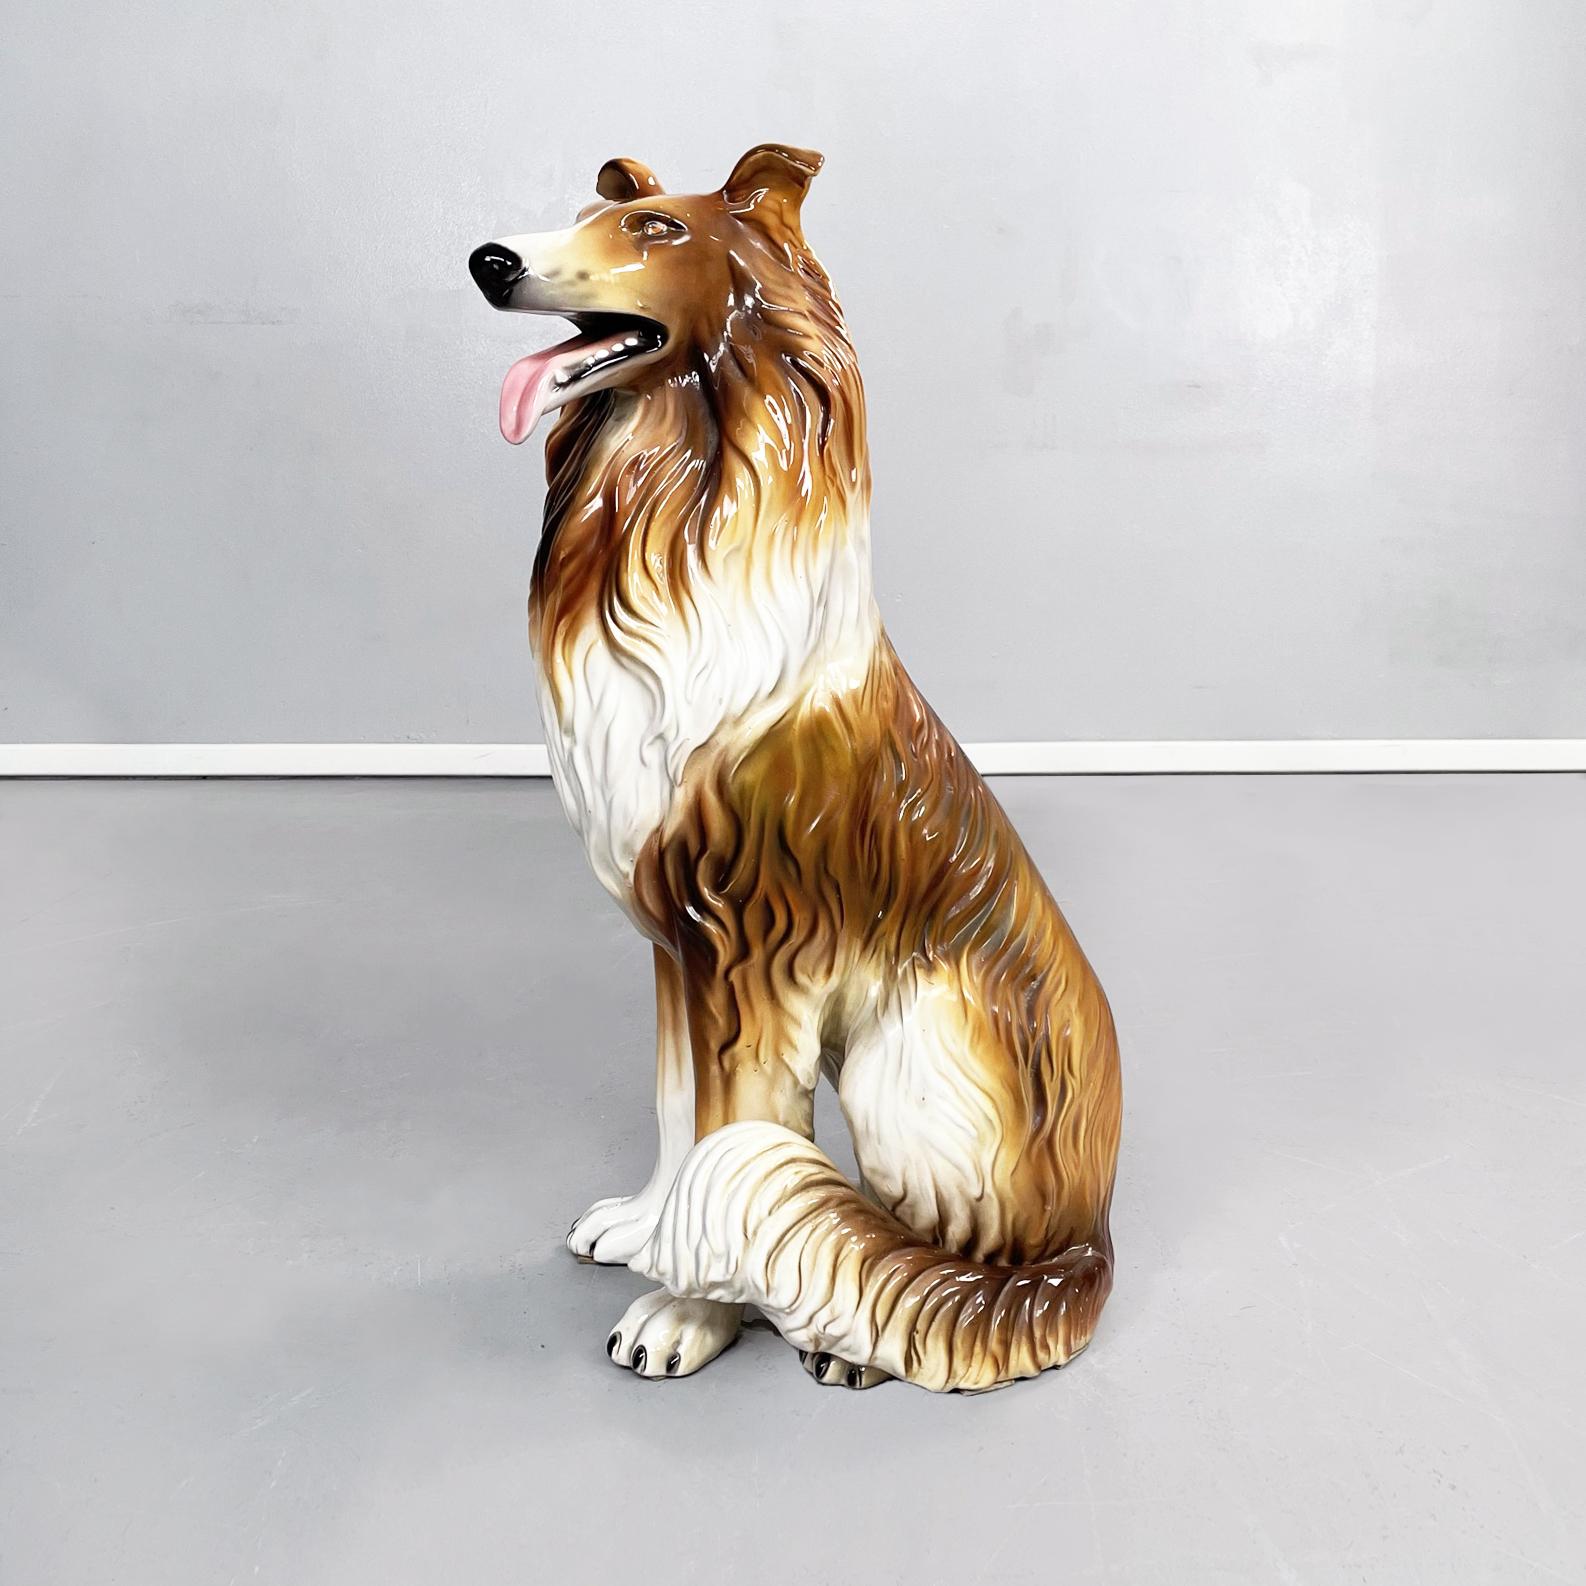 Italian modern Sculpture of sitting rough collie dog in ceramic, 1970s

Sculpture of a sitting long-haired rough collie dog, in brown, white, beige, pink and black ceramic. 
The sculpture is finely worked in all details.
Produced in Italy in Bassano